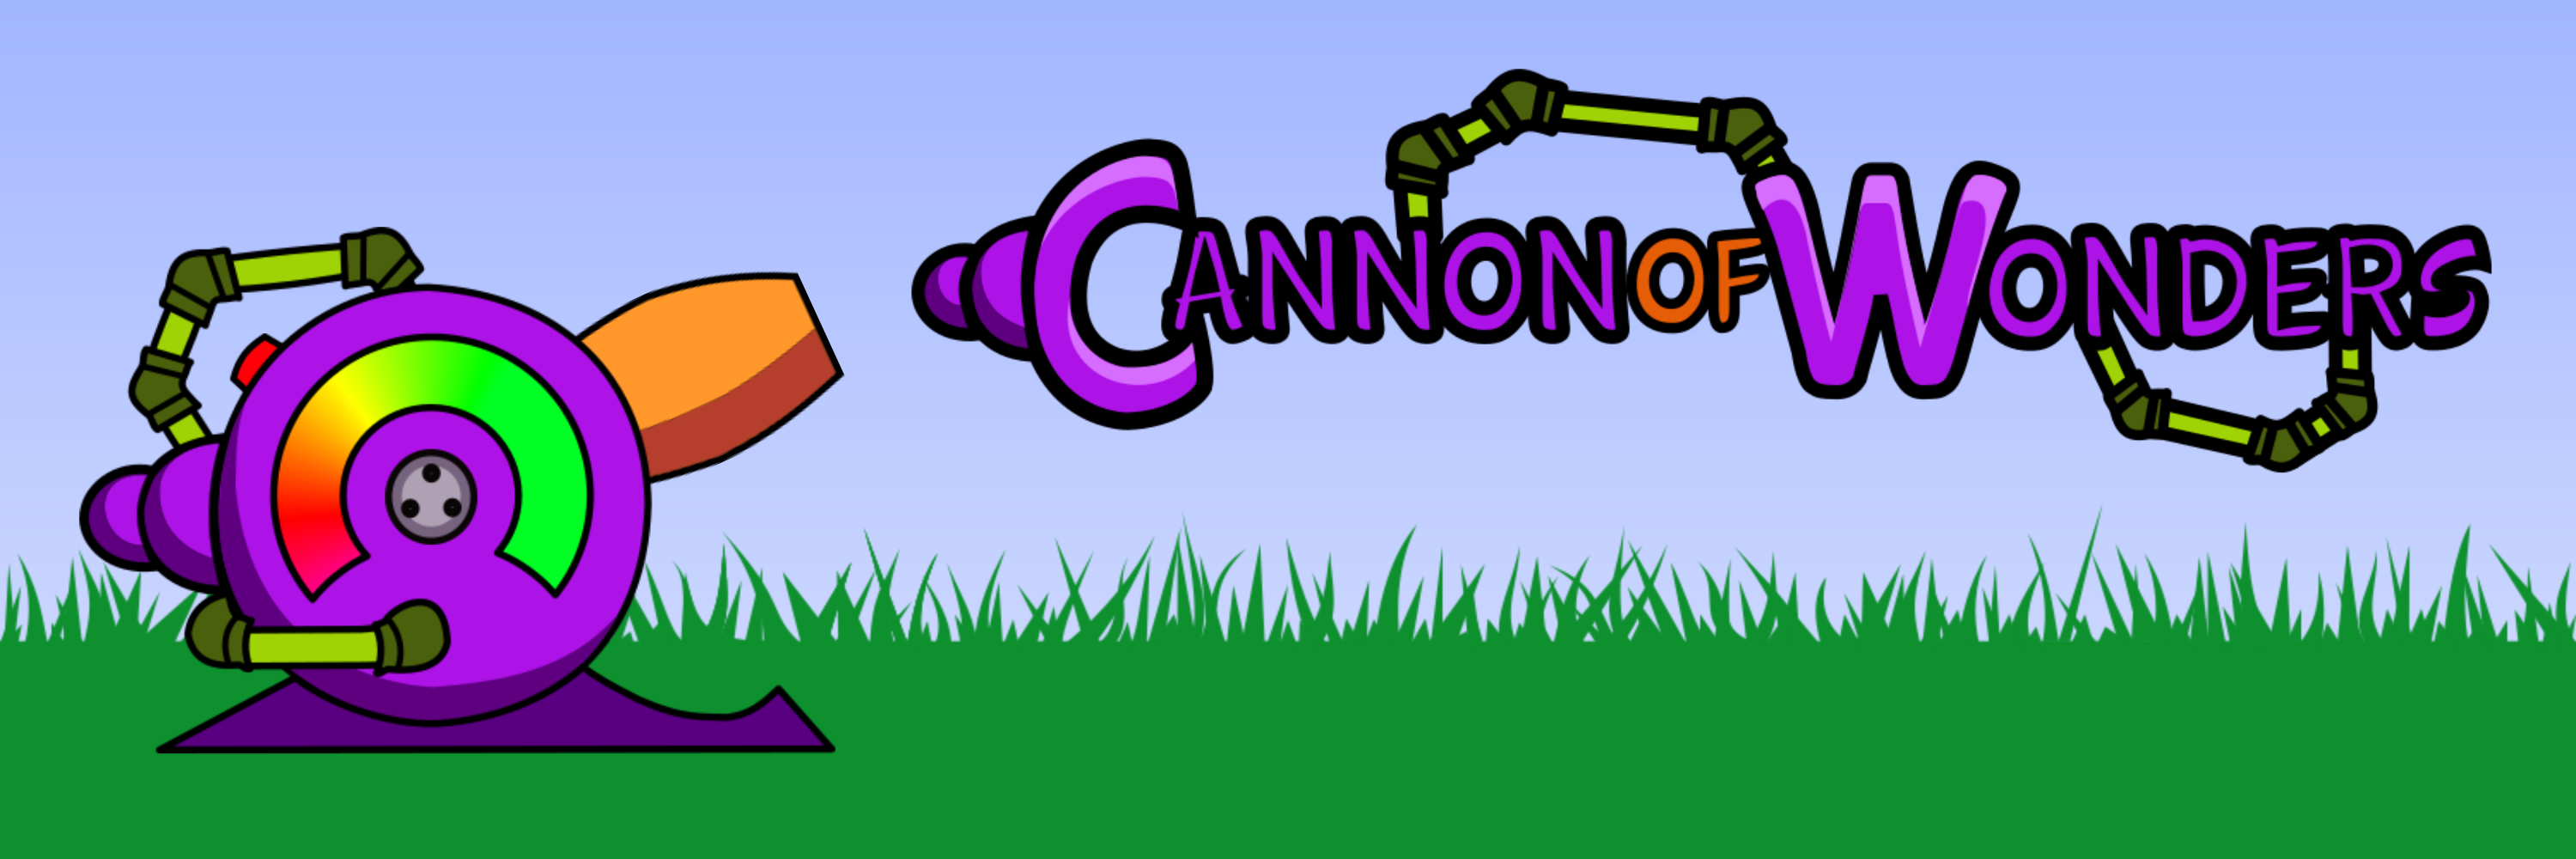 Cannon of Wonders